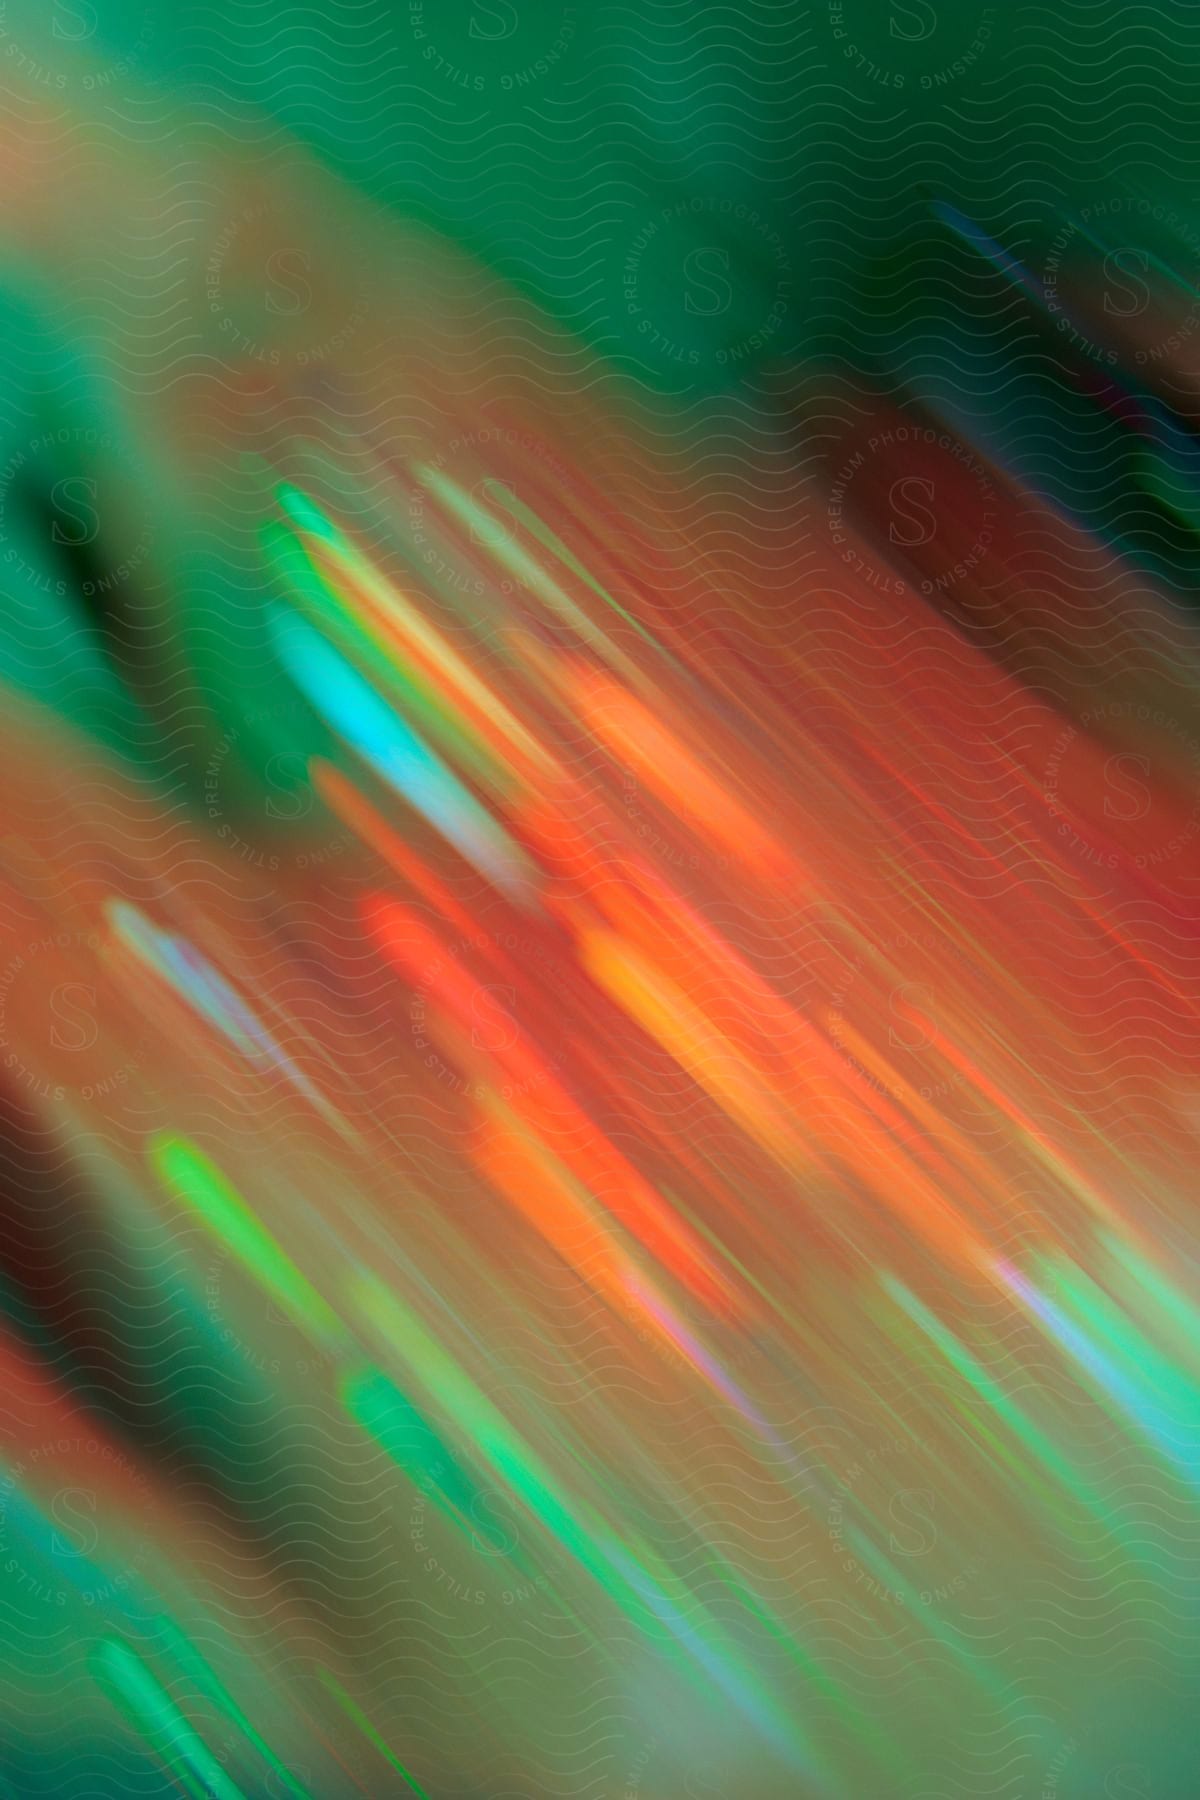 A surface with many blurred lines in an abstract way